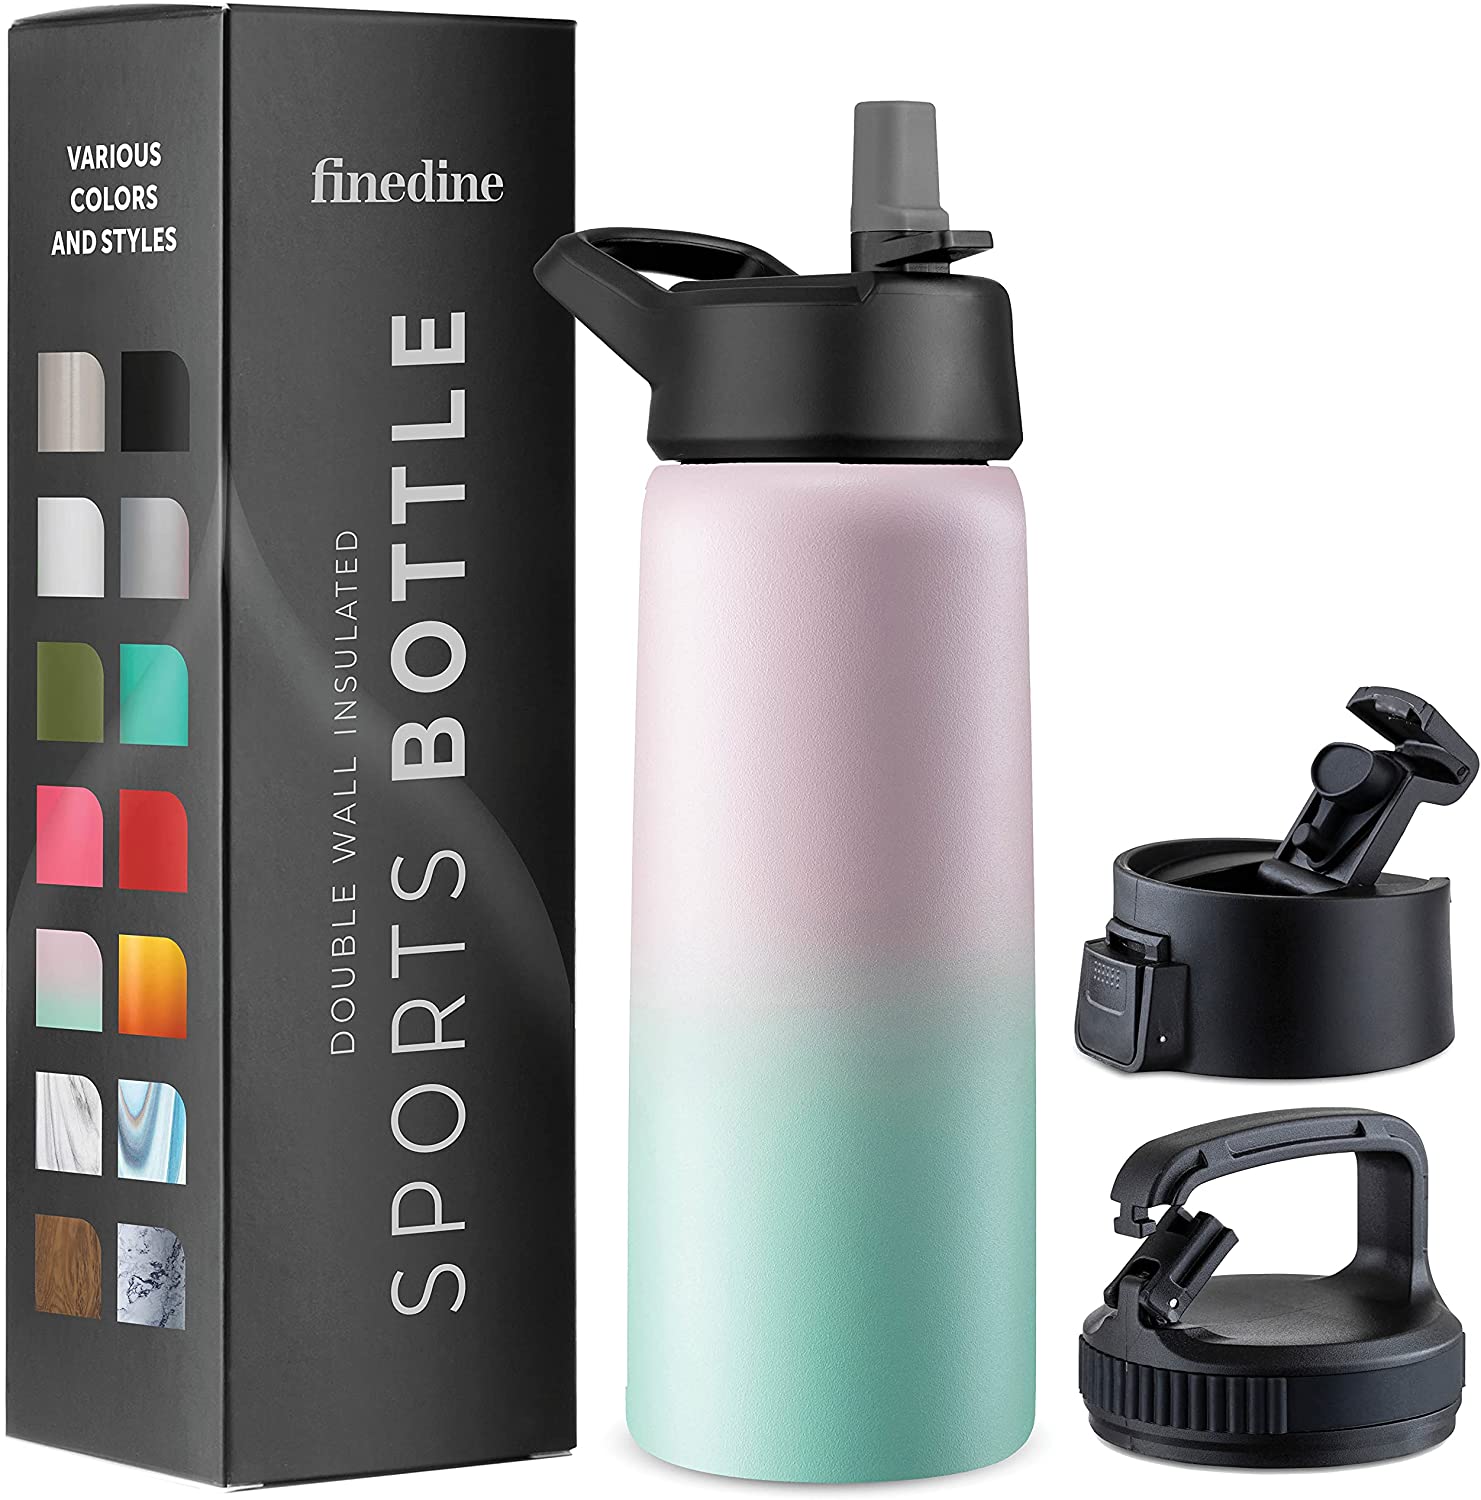 FineDine Double Walled Insulated Water Bottle, 25-Ounce